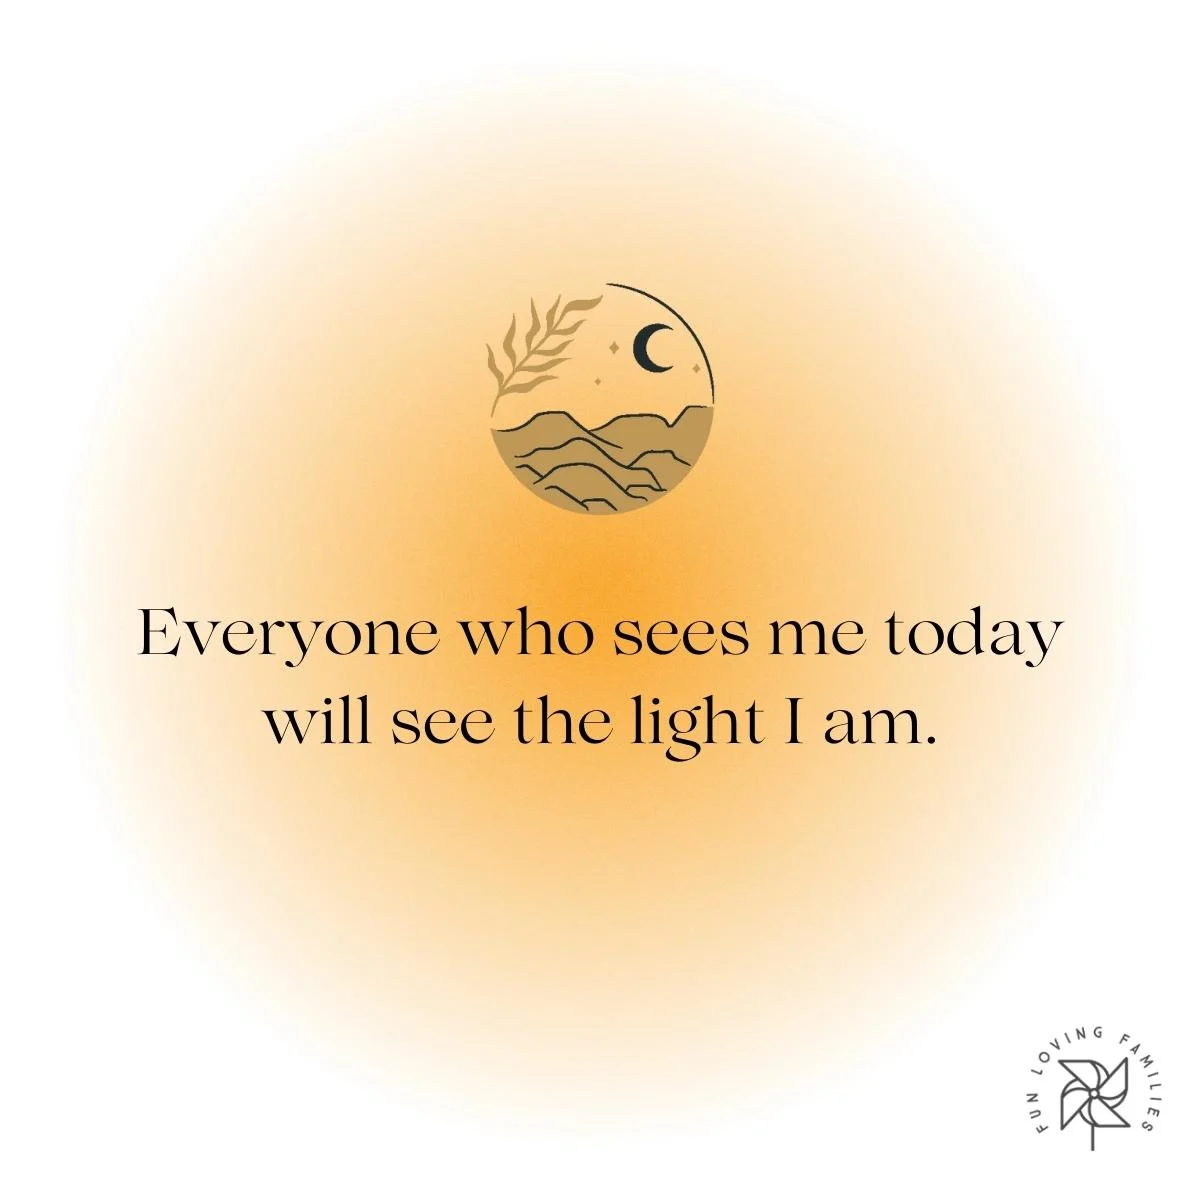 Everyone who sees me today will see the light I am affirmation